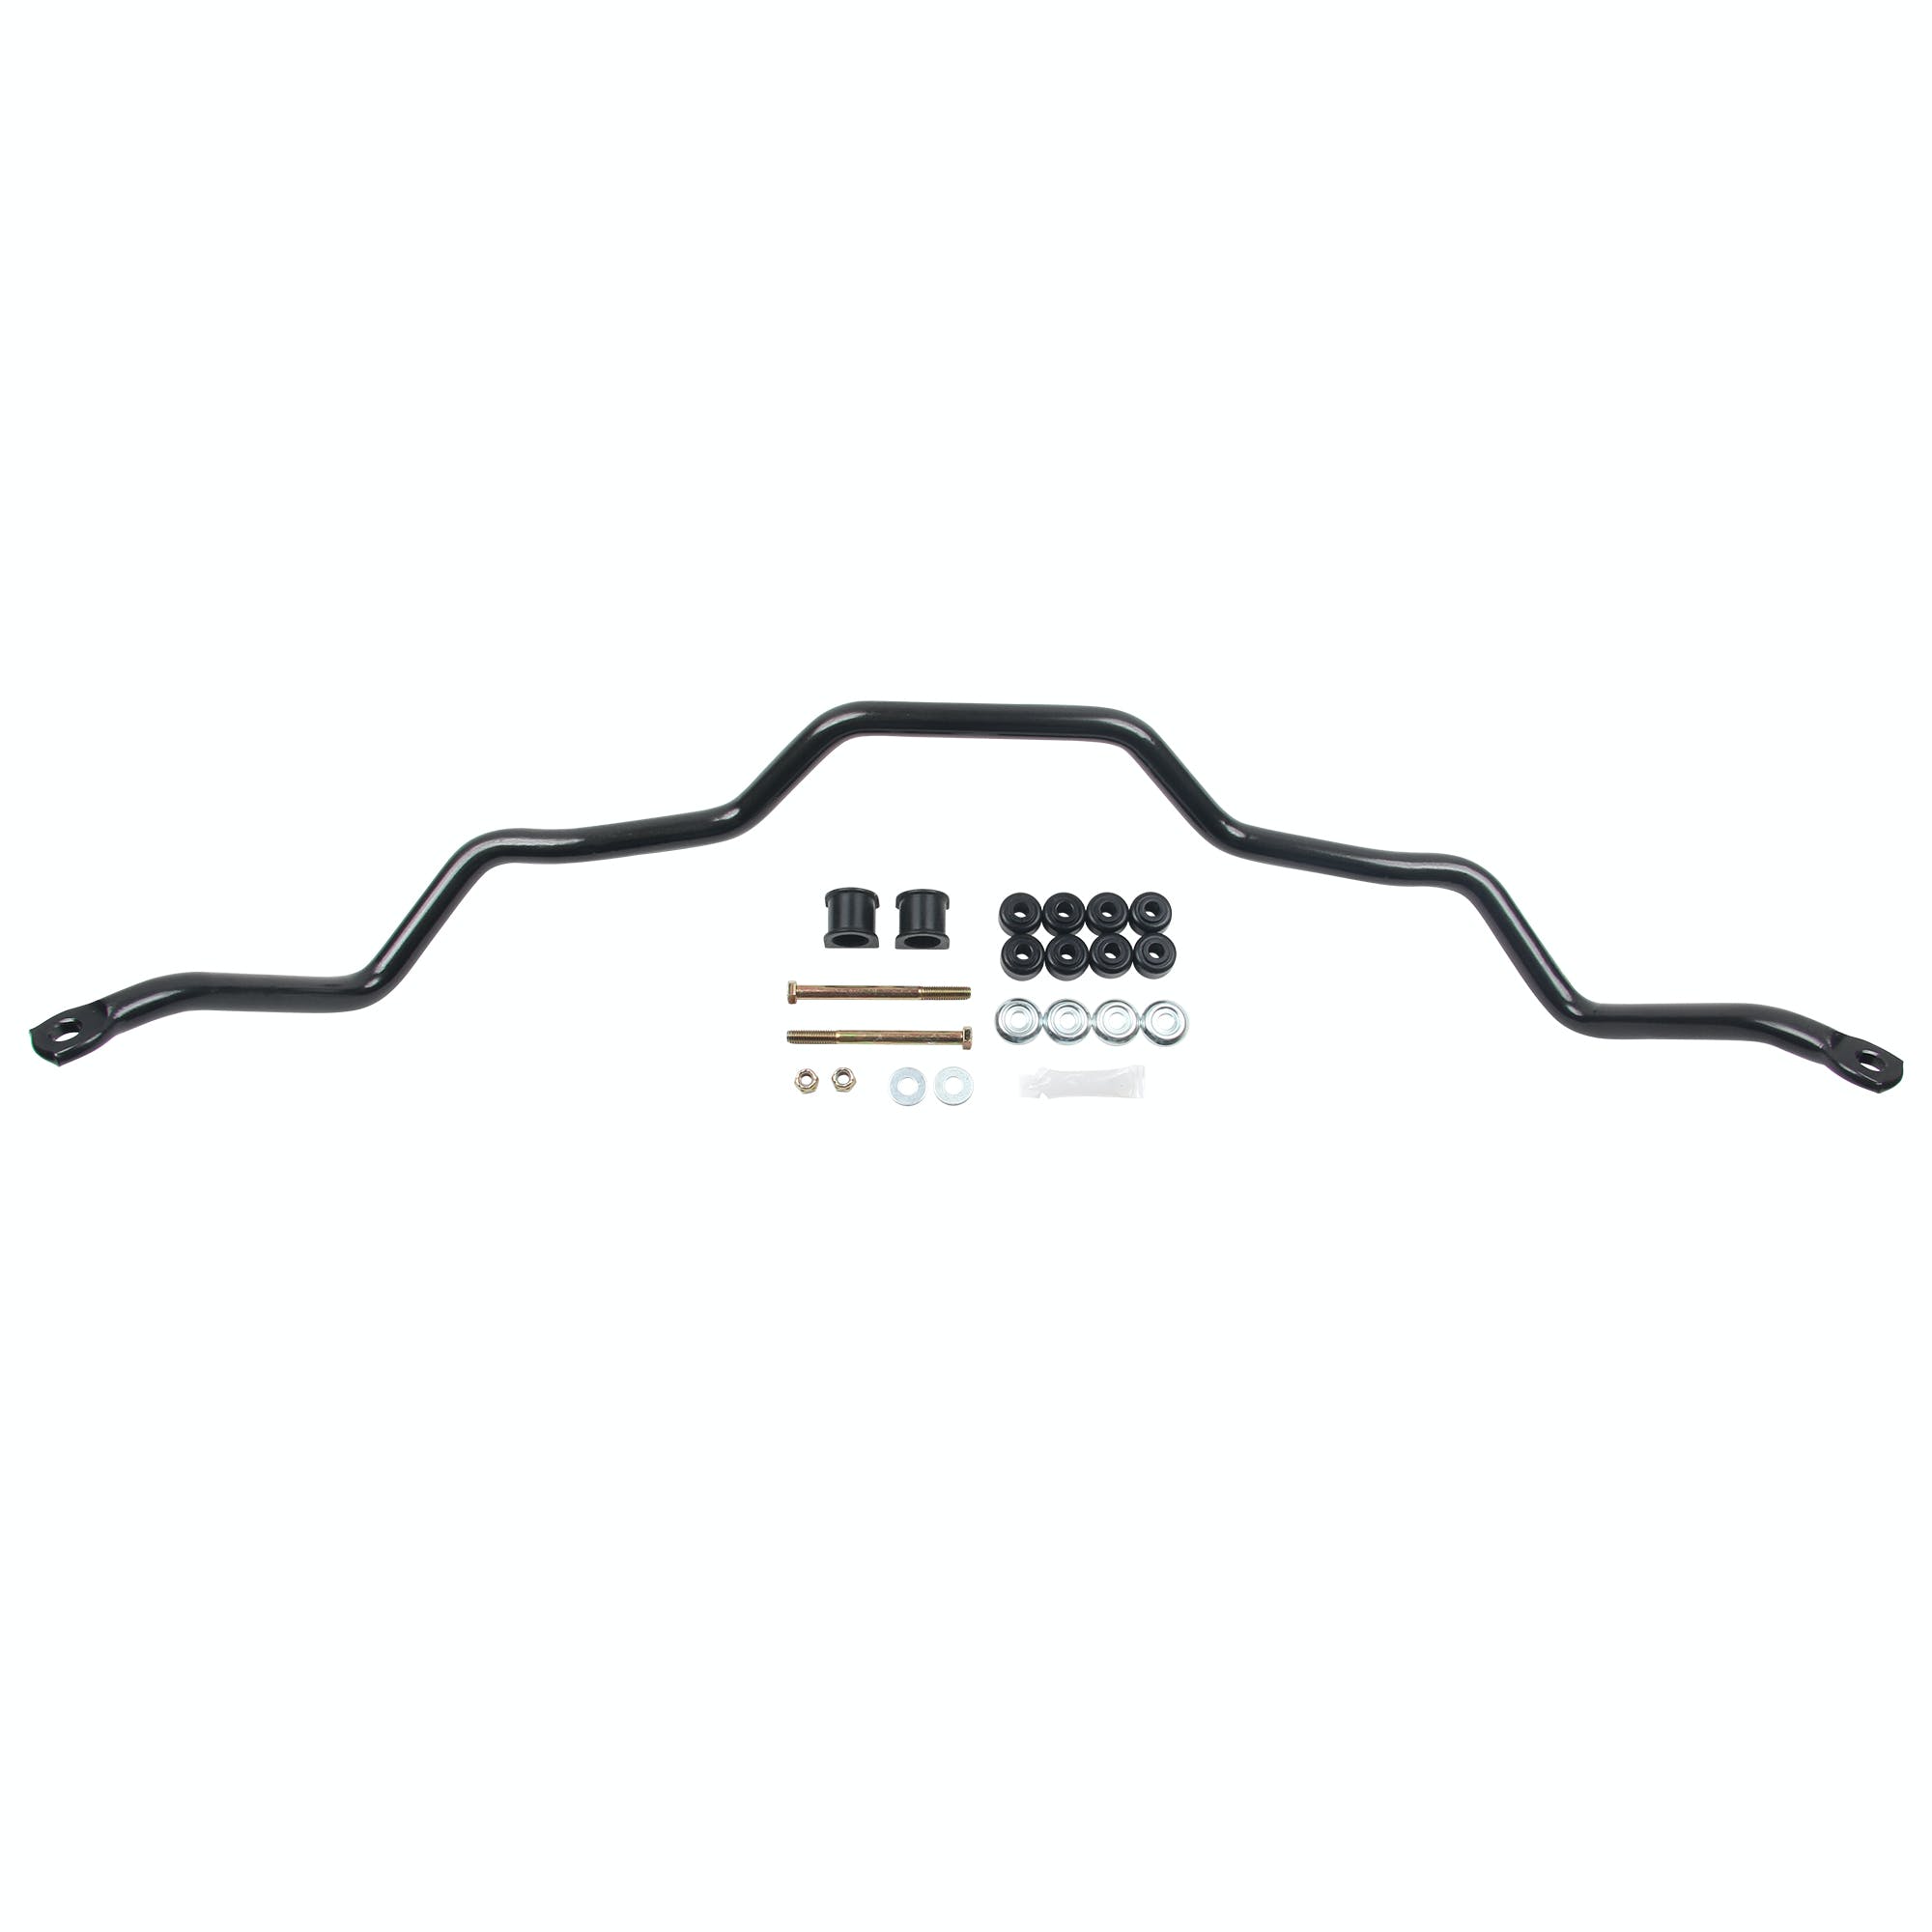 ST Suspensions 50145 Front Anti-Swaybar